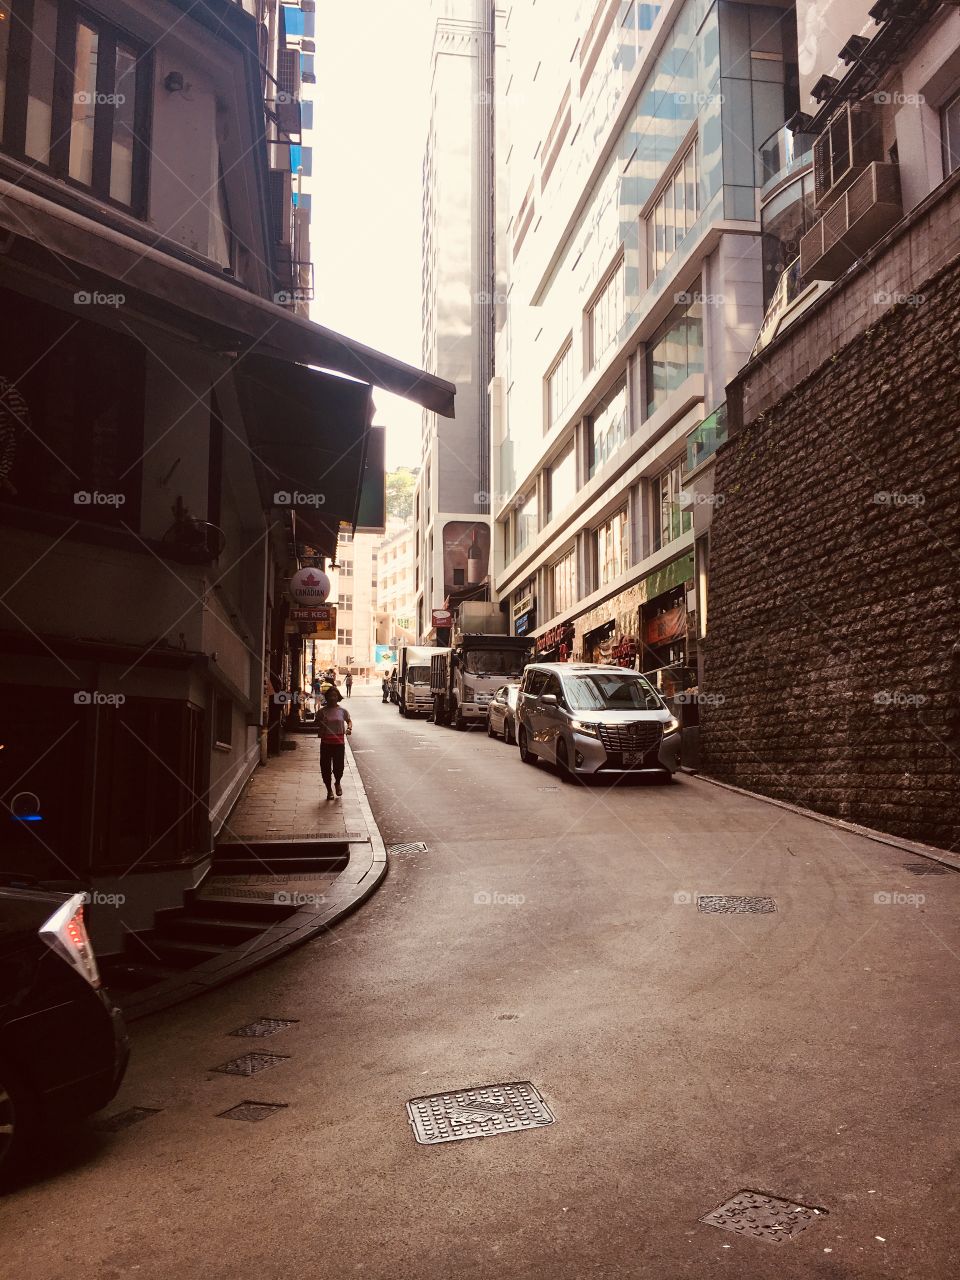 Streets of Hong Kong. Amazing place filled w wealth, business, luxury, and modernization, but also holding on tight to history, culture, and grit. Hidden back alley here 